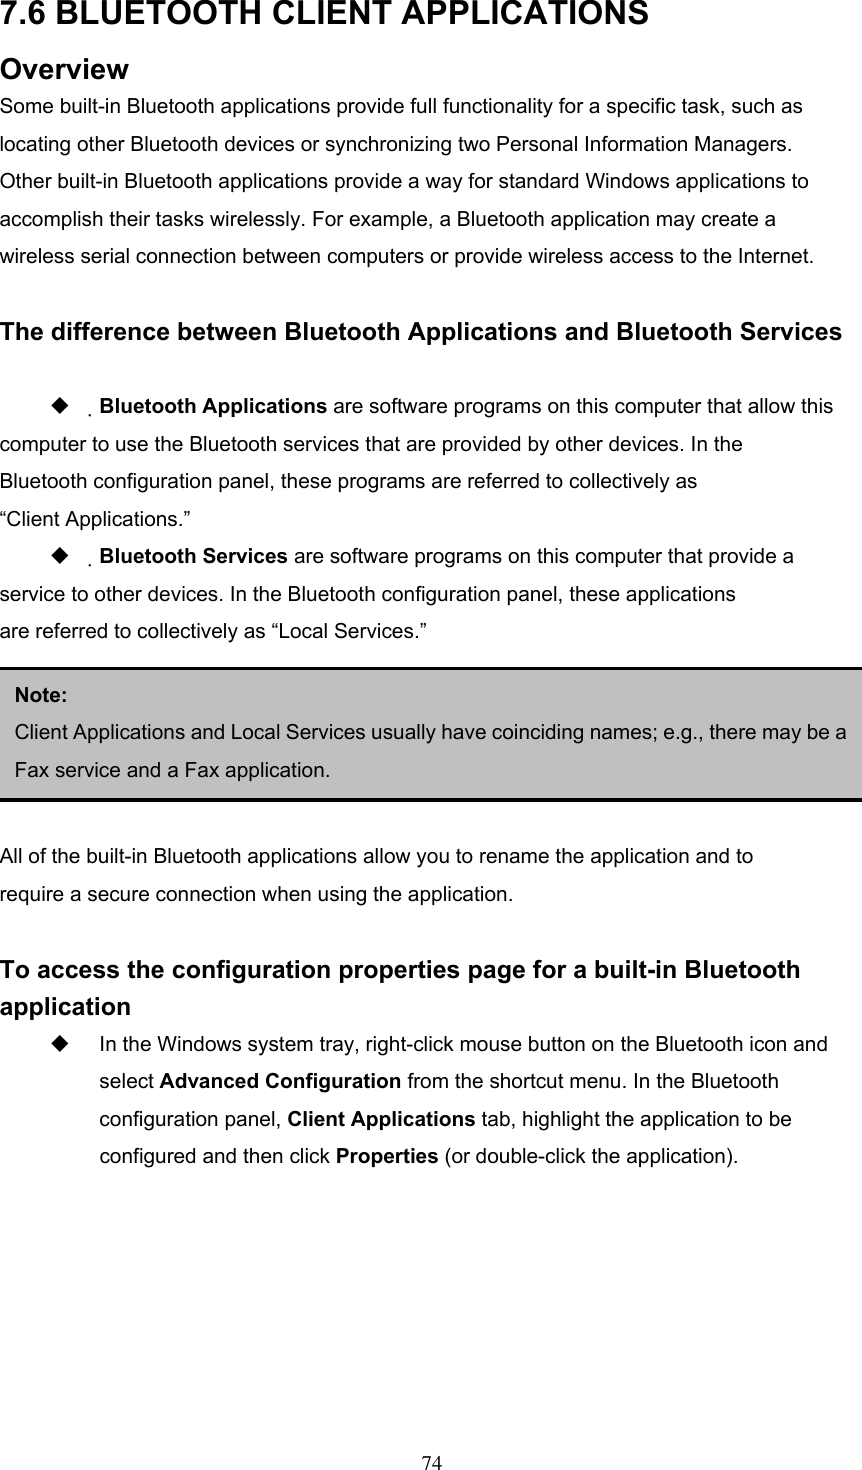 7.6 BLUETOOTH CLIENT APPLICATIONS Overview Some built-in Bluetooth applications provide full functionality for a specific task, such as locating other Bluetooth devices or synchronizing two Personal Information Managers. Other built-in Bluetooth applications provide a way for standard Windows applications to accomplish their tasks wirelessly. For example, a Bluetooth application may create a wireless serial connection between computers or provide wireless access to the Internet.  The difference between Bluetooth Applications and Bluetooth Services    Bluetooth Applications are software programs on this computer that allow this computer to use the Bluetooth services that are provided by other devices. In the Bluetooth configuration panel, these programs are referred to collectively as “Client Applications.”   Bluetooth Services are software programs on this computer that provide a service to other devices. In the Bluetooth configuration panel, these applications are referred to collectively as “Local Services.”    3.5.2 General Configuration  Note:  Client Applications and Local Services usually have coinciding names; e.g., there may be aFax service and a Fax application. All of the built-in Bluetooth applications allow you to rename the application and to require a secure connection when using the application.  To access the configuration properties page for a built-in Bluetooth application   In the Windows system tray, right-click mouse button on the Bluetooth icon and select Advanced Configuration from the shortcut menu. In the Bluetooth configuration panel, Client Applications tab, highlight the application to be configured and then click Properties (or double-click the application).  74 